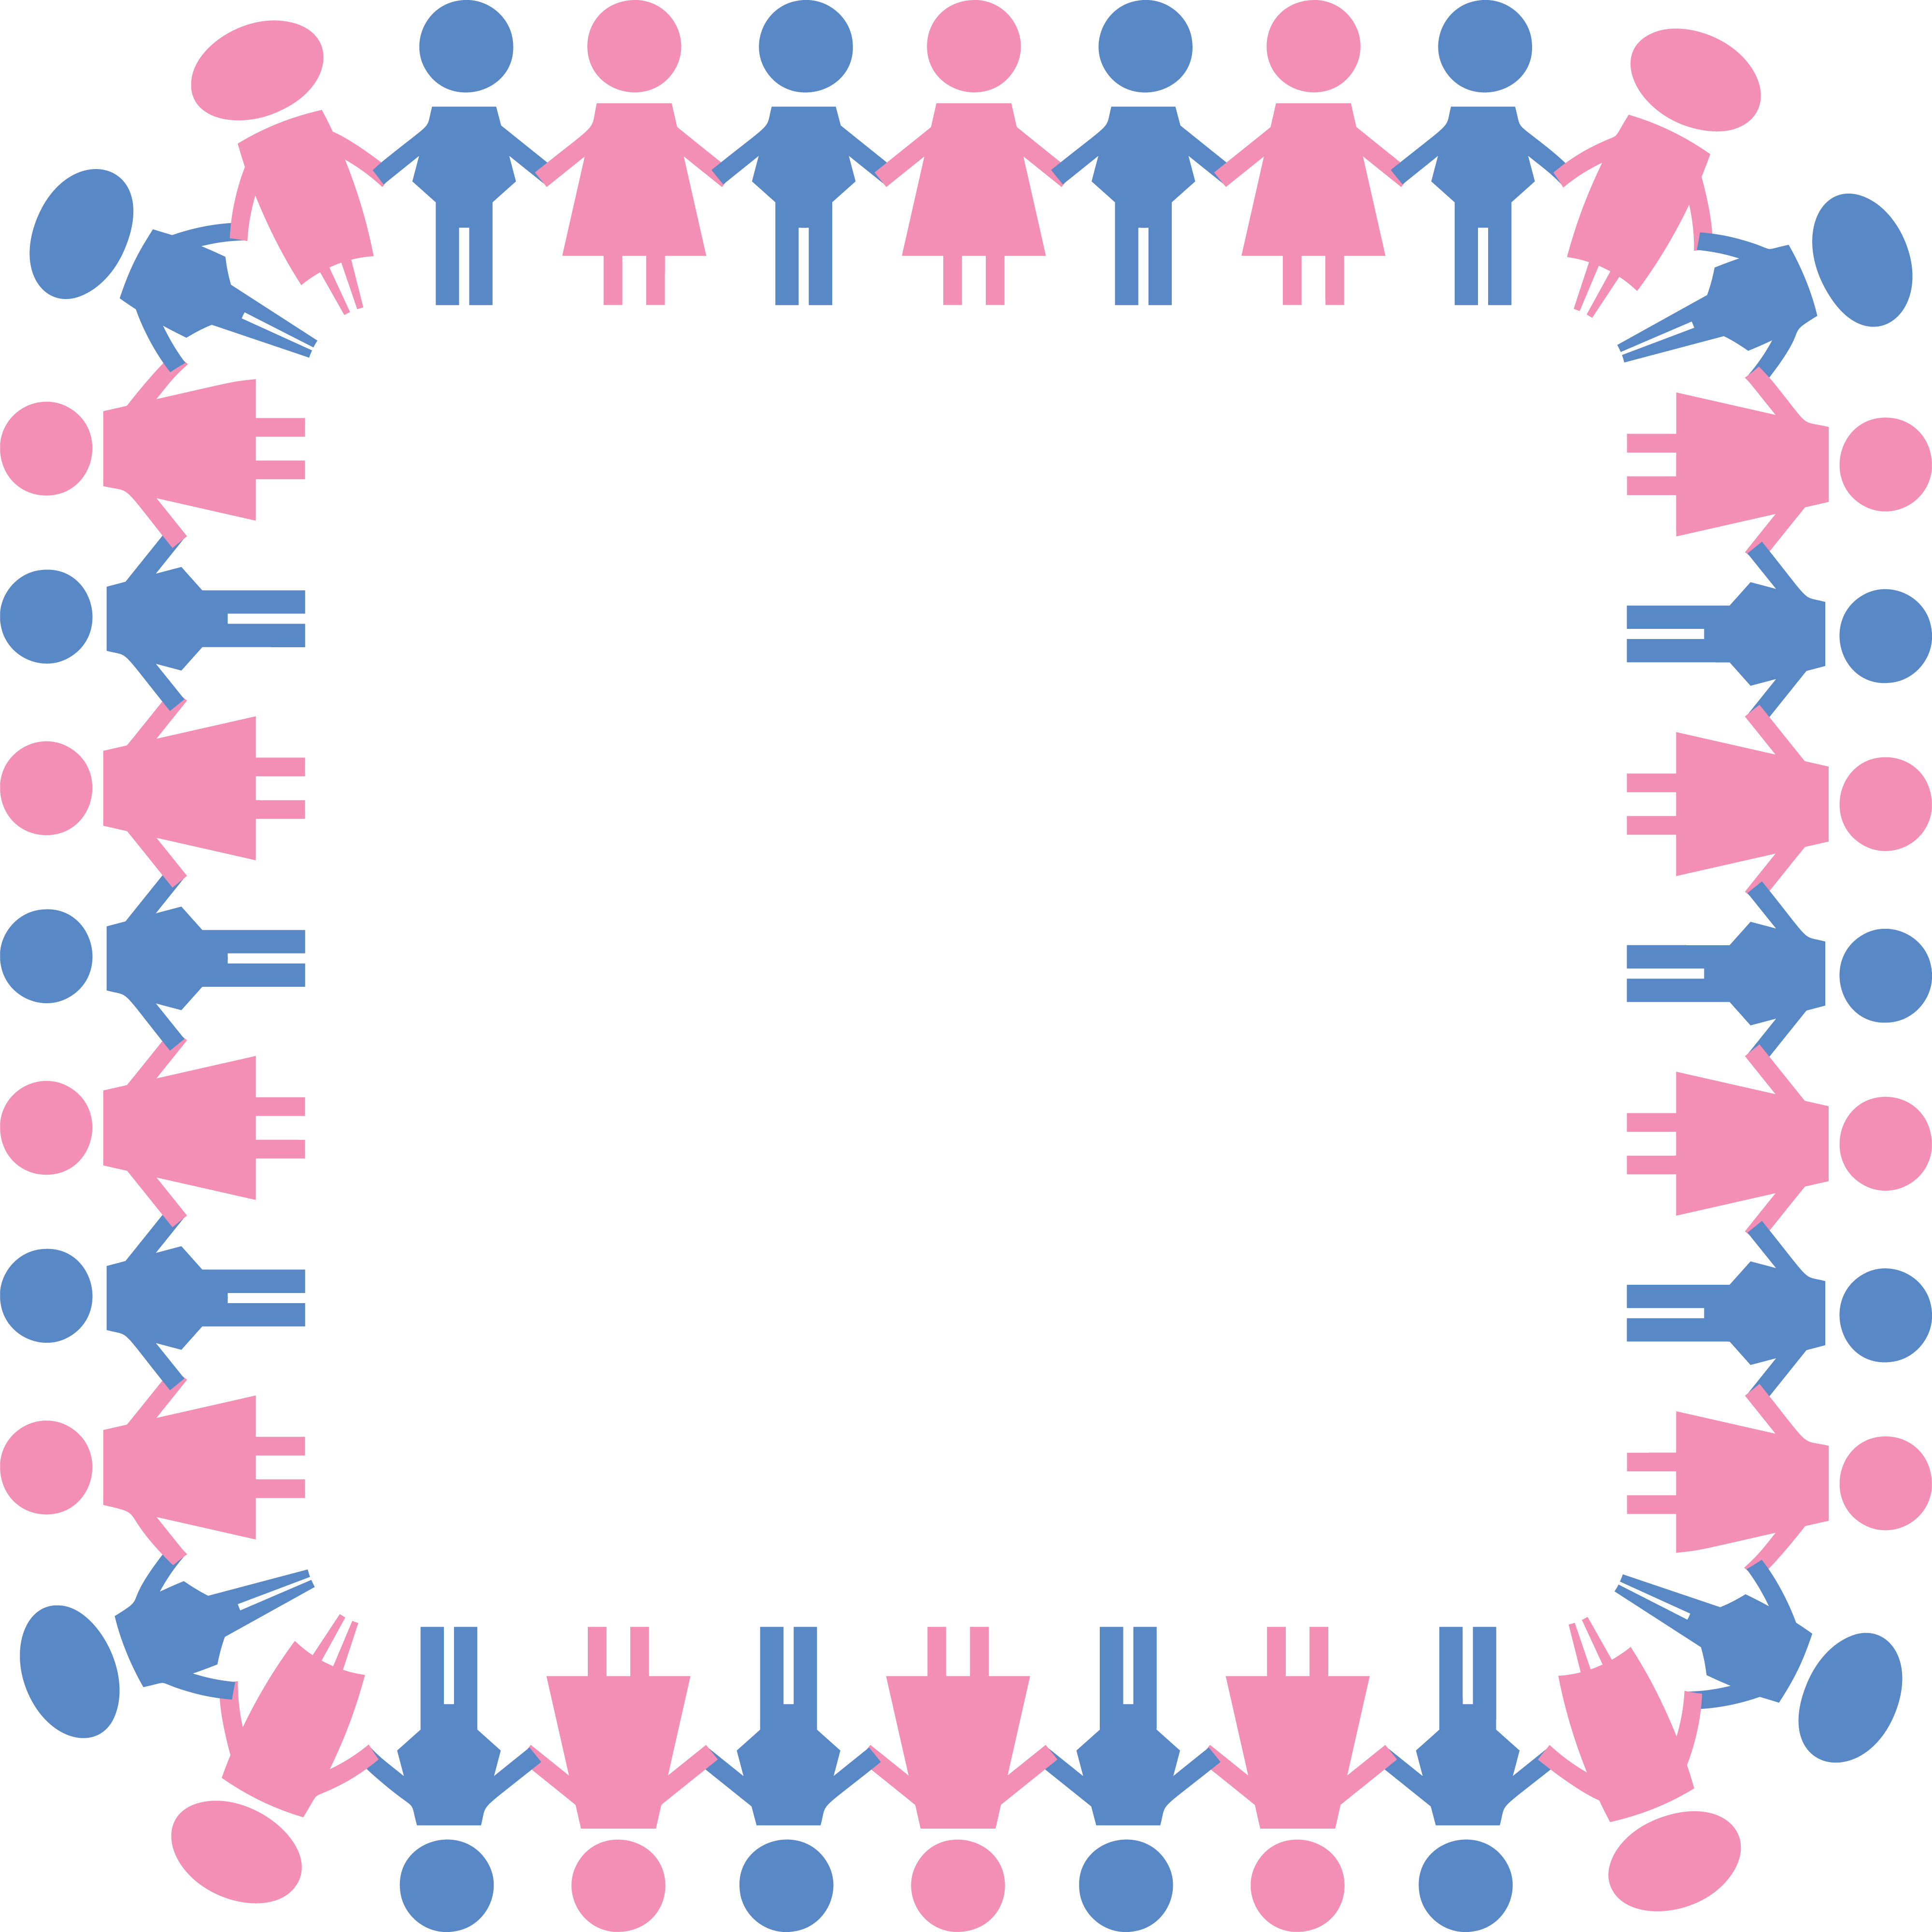 Male And Female Symbols Holding Hands Square Large - Male And Female Symbols Holding Hands Square Large (4000x4000)